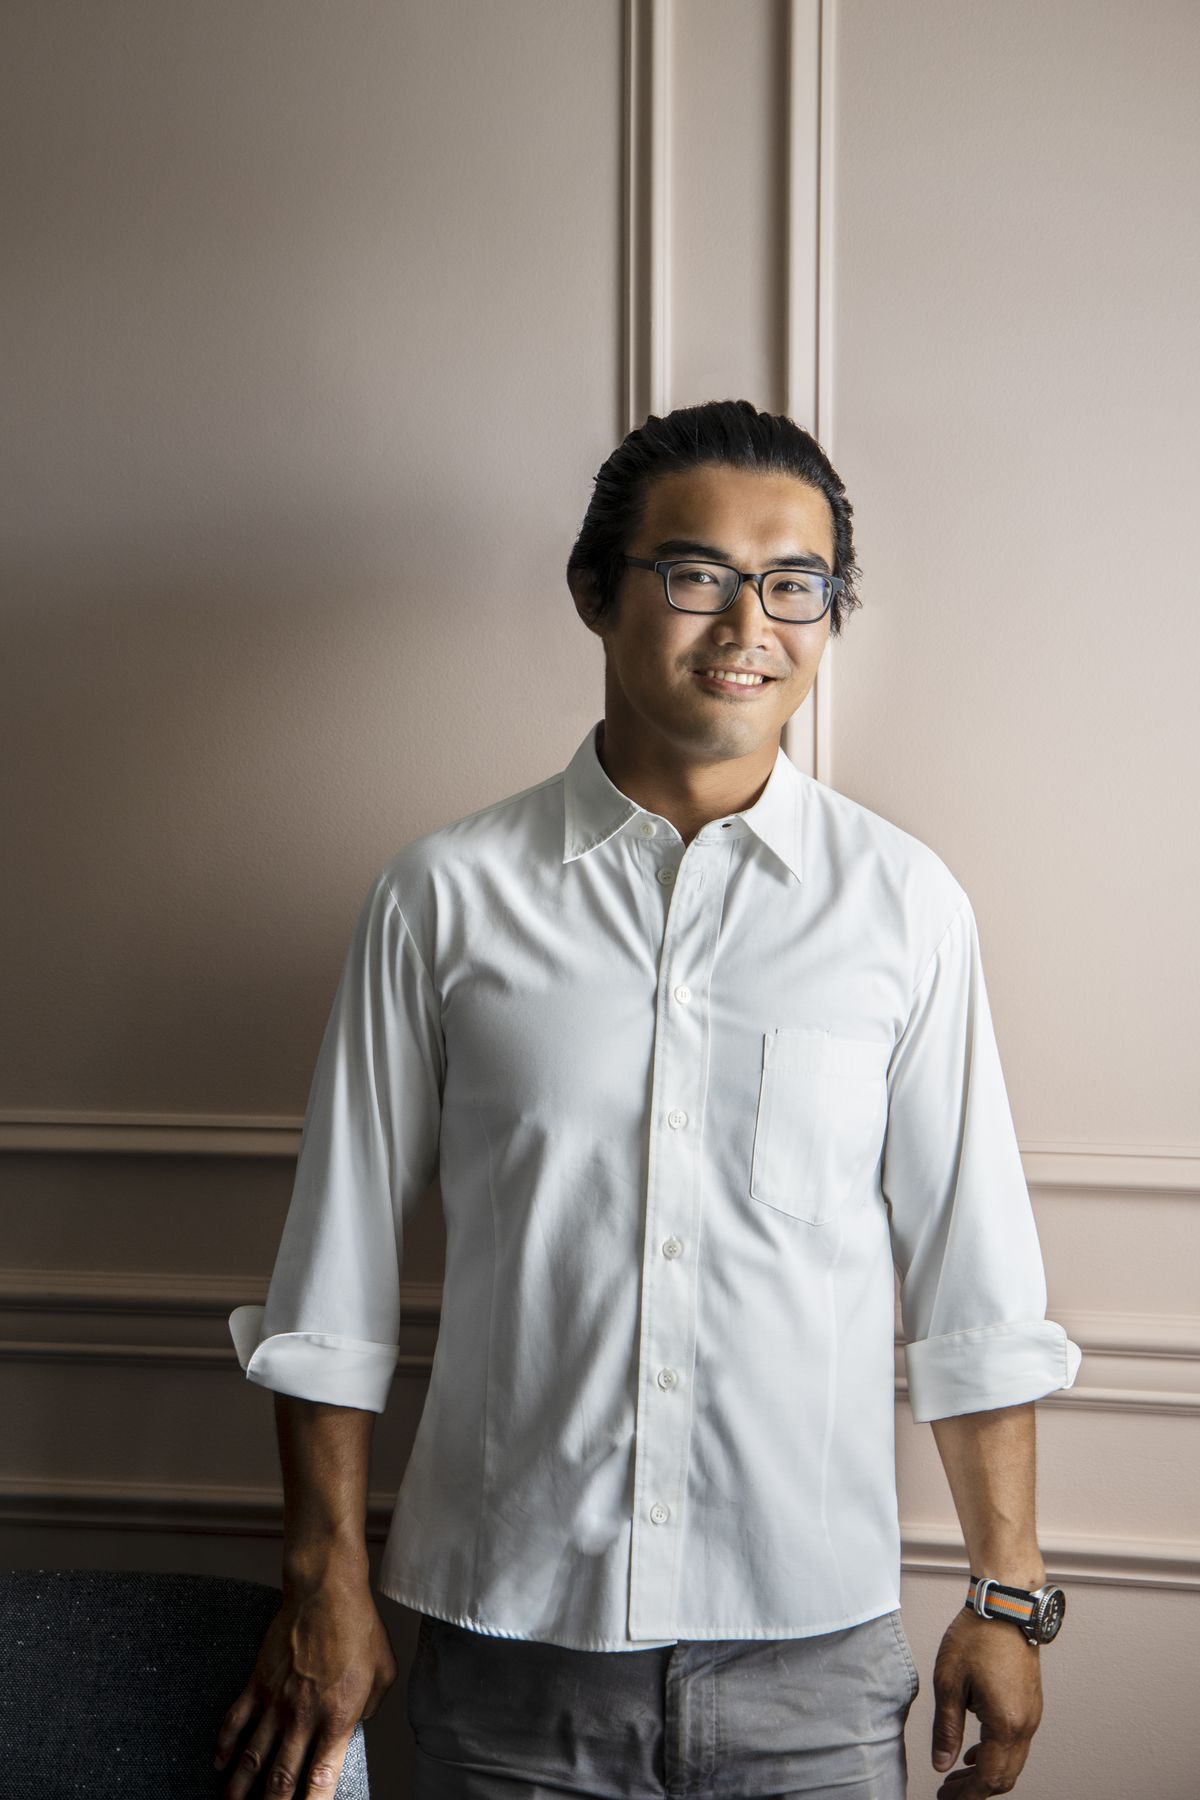 Chef Bin Lu poses for a portrait in a white button-down shirt.